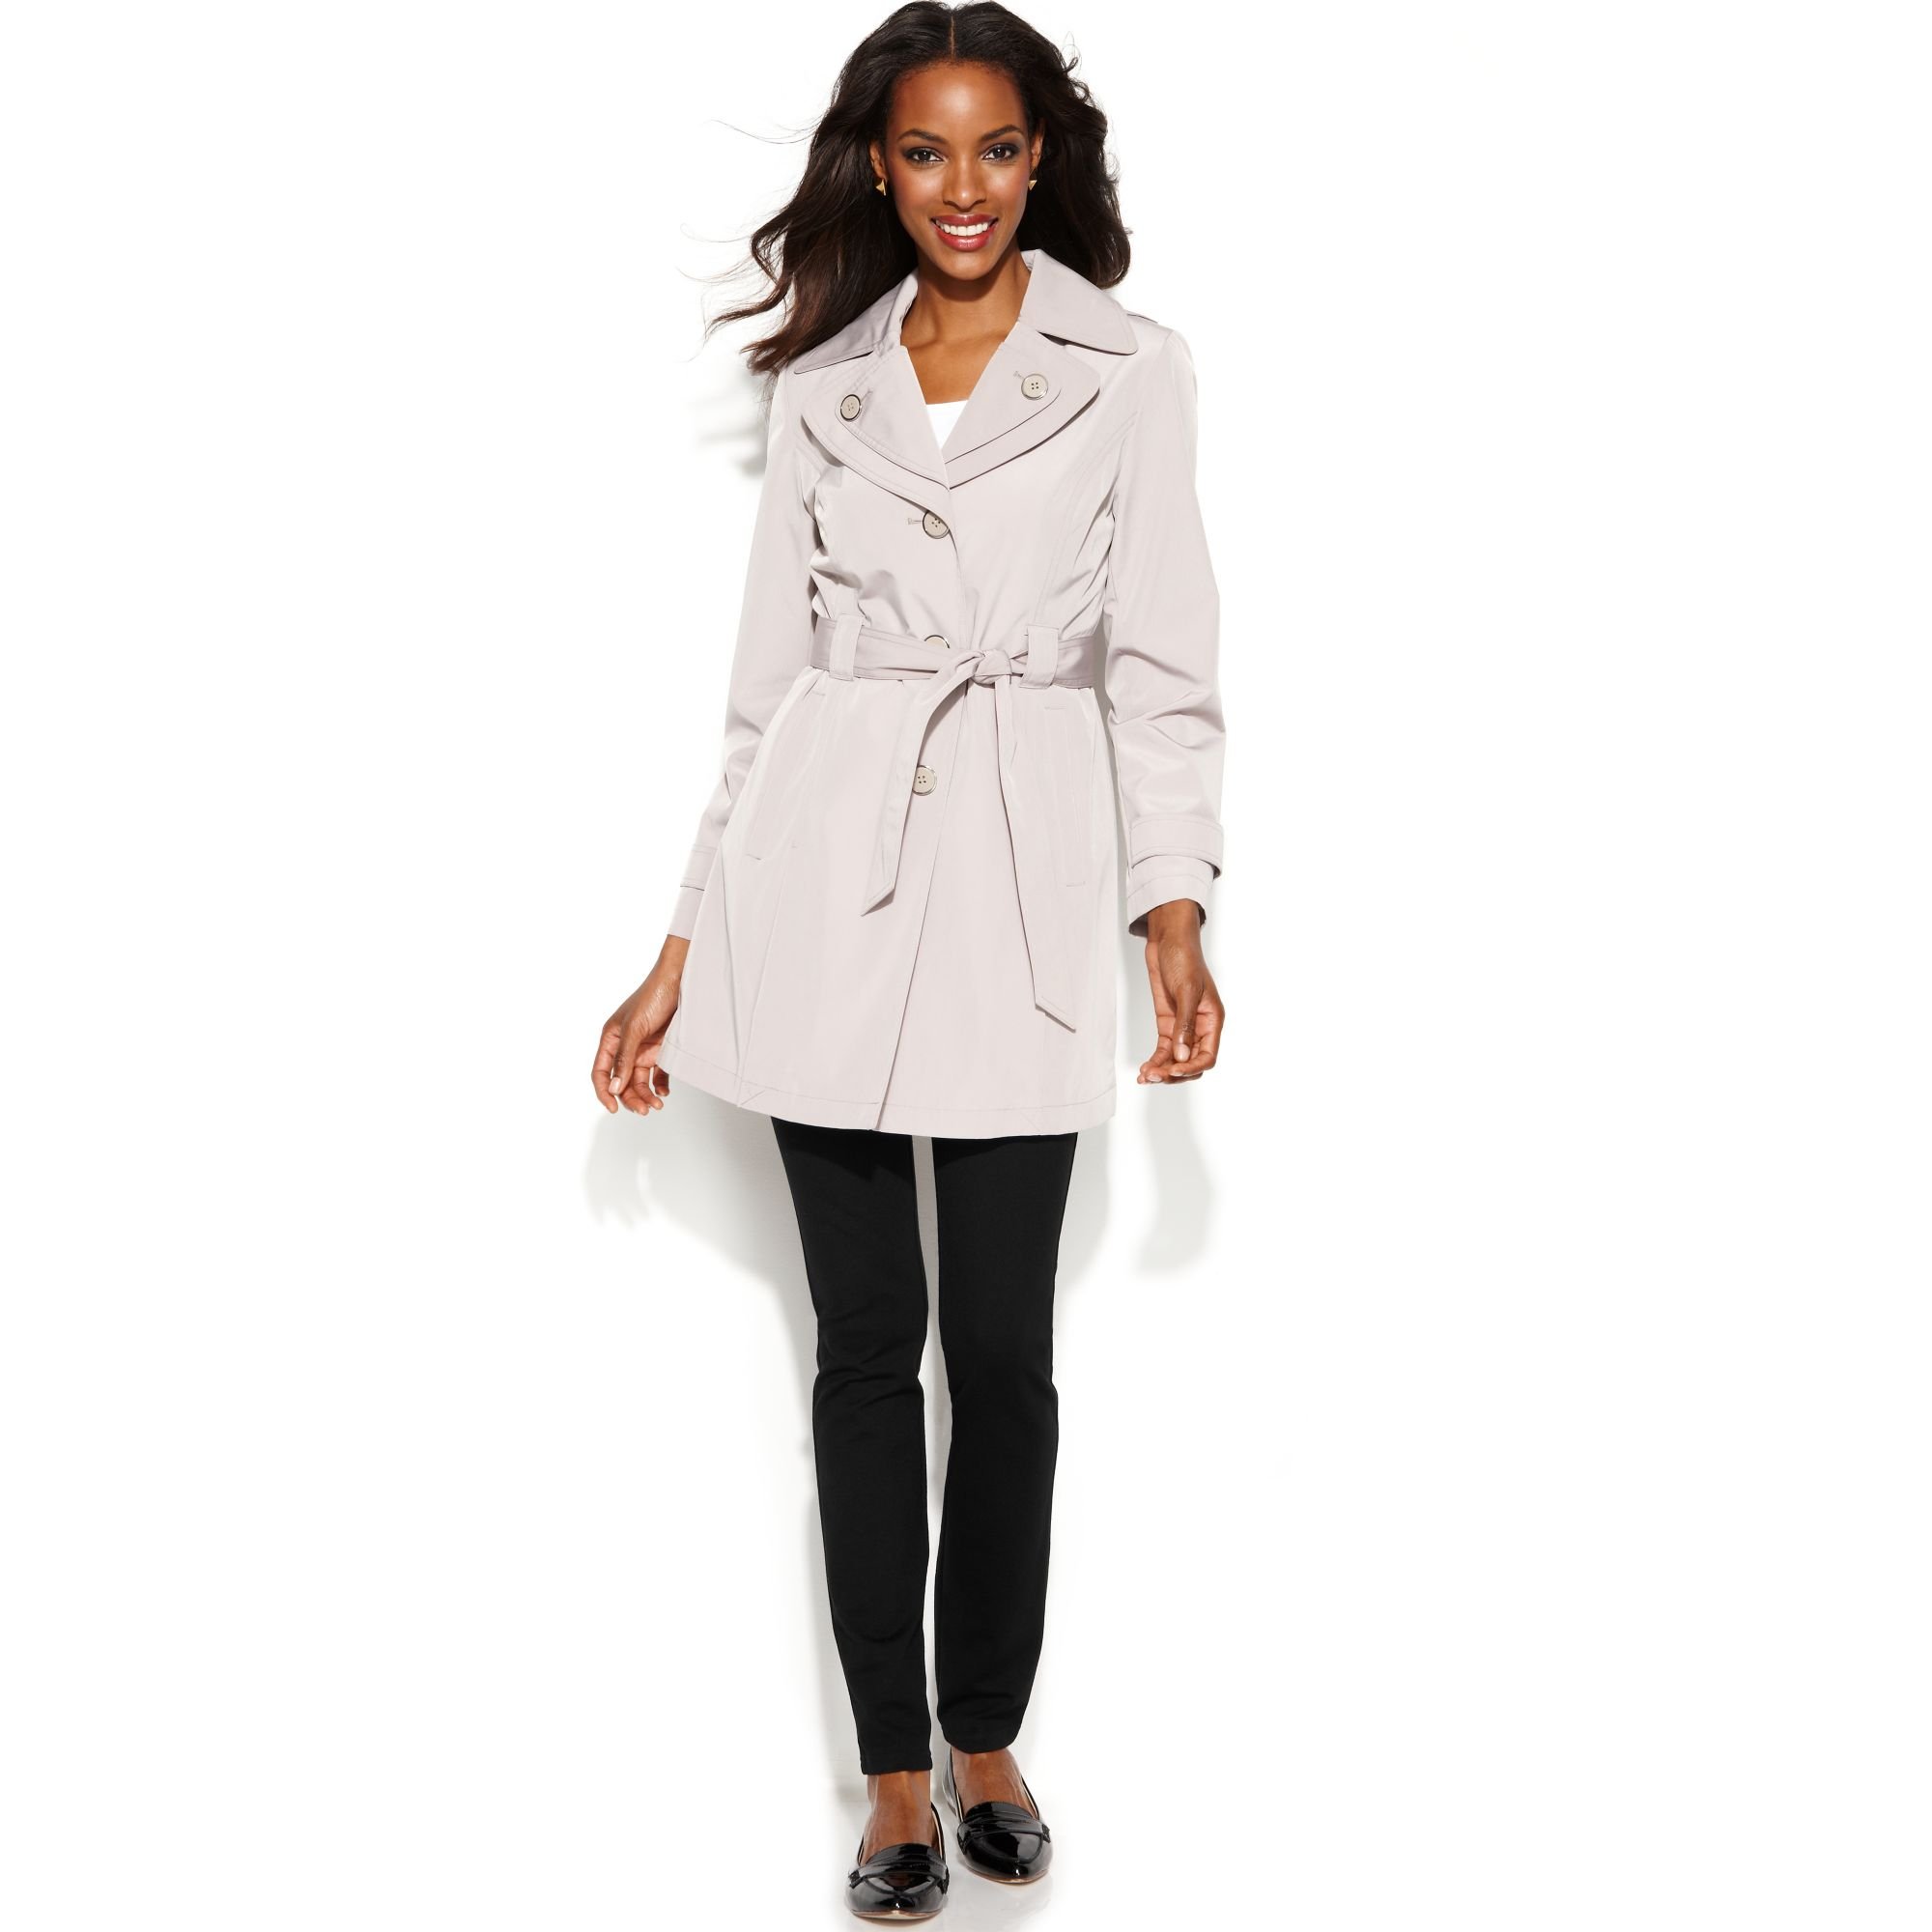 Lyst - London Fog Petite Hooded Belted Trench Coat in Natural